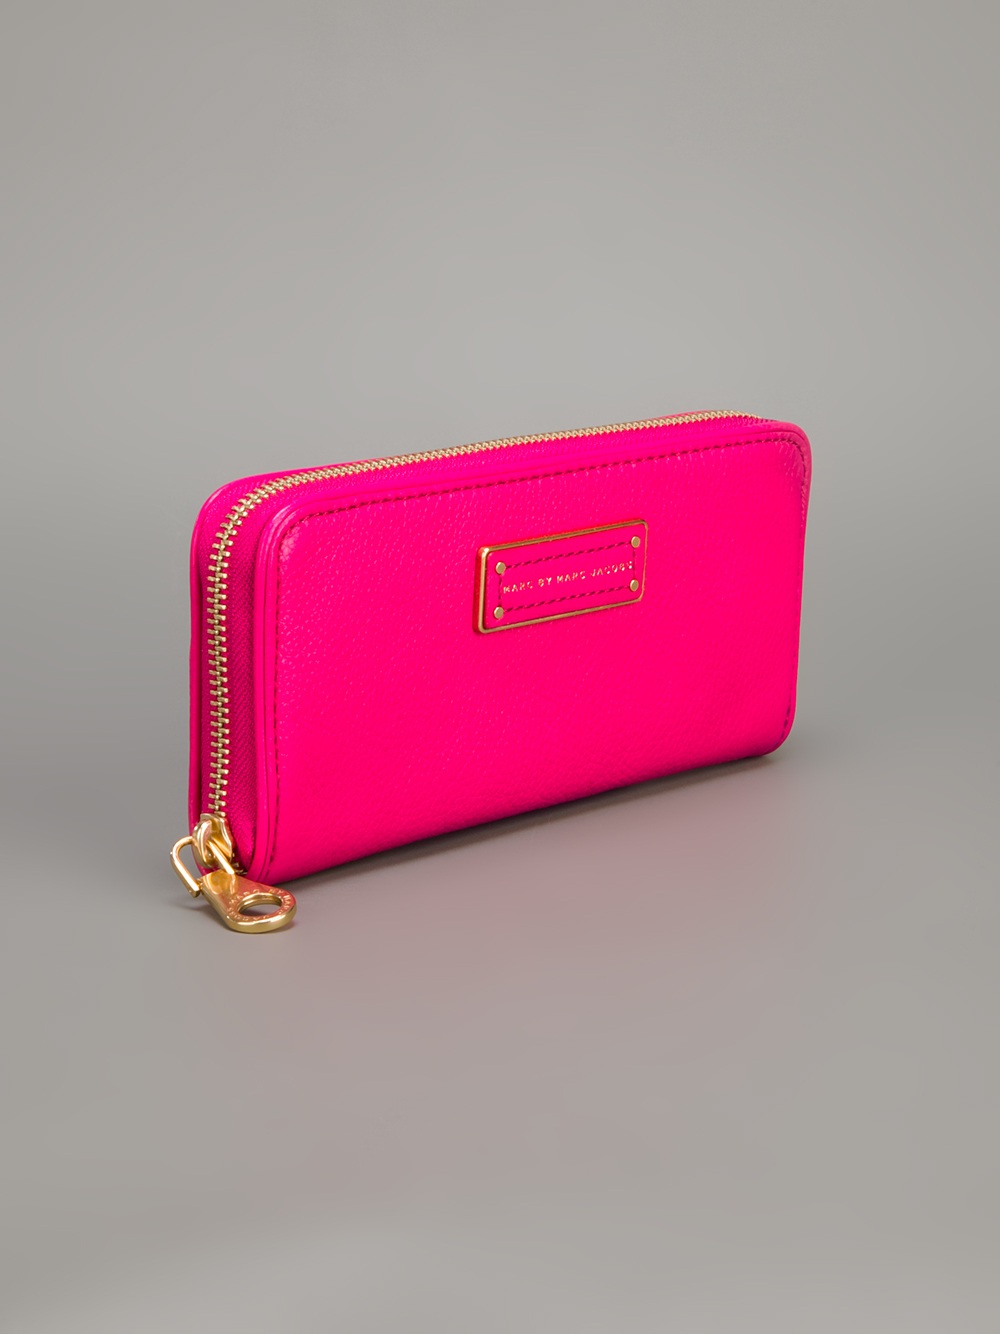 Marc By Marc Jacobs Too Hot Wallet in Fuschia (Pink) - Lyst